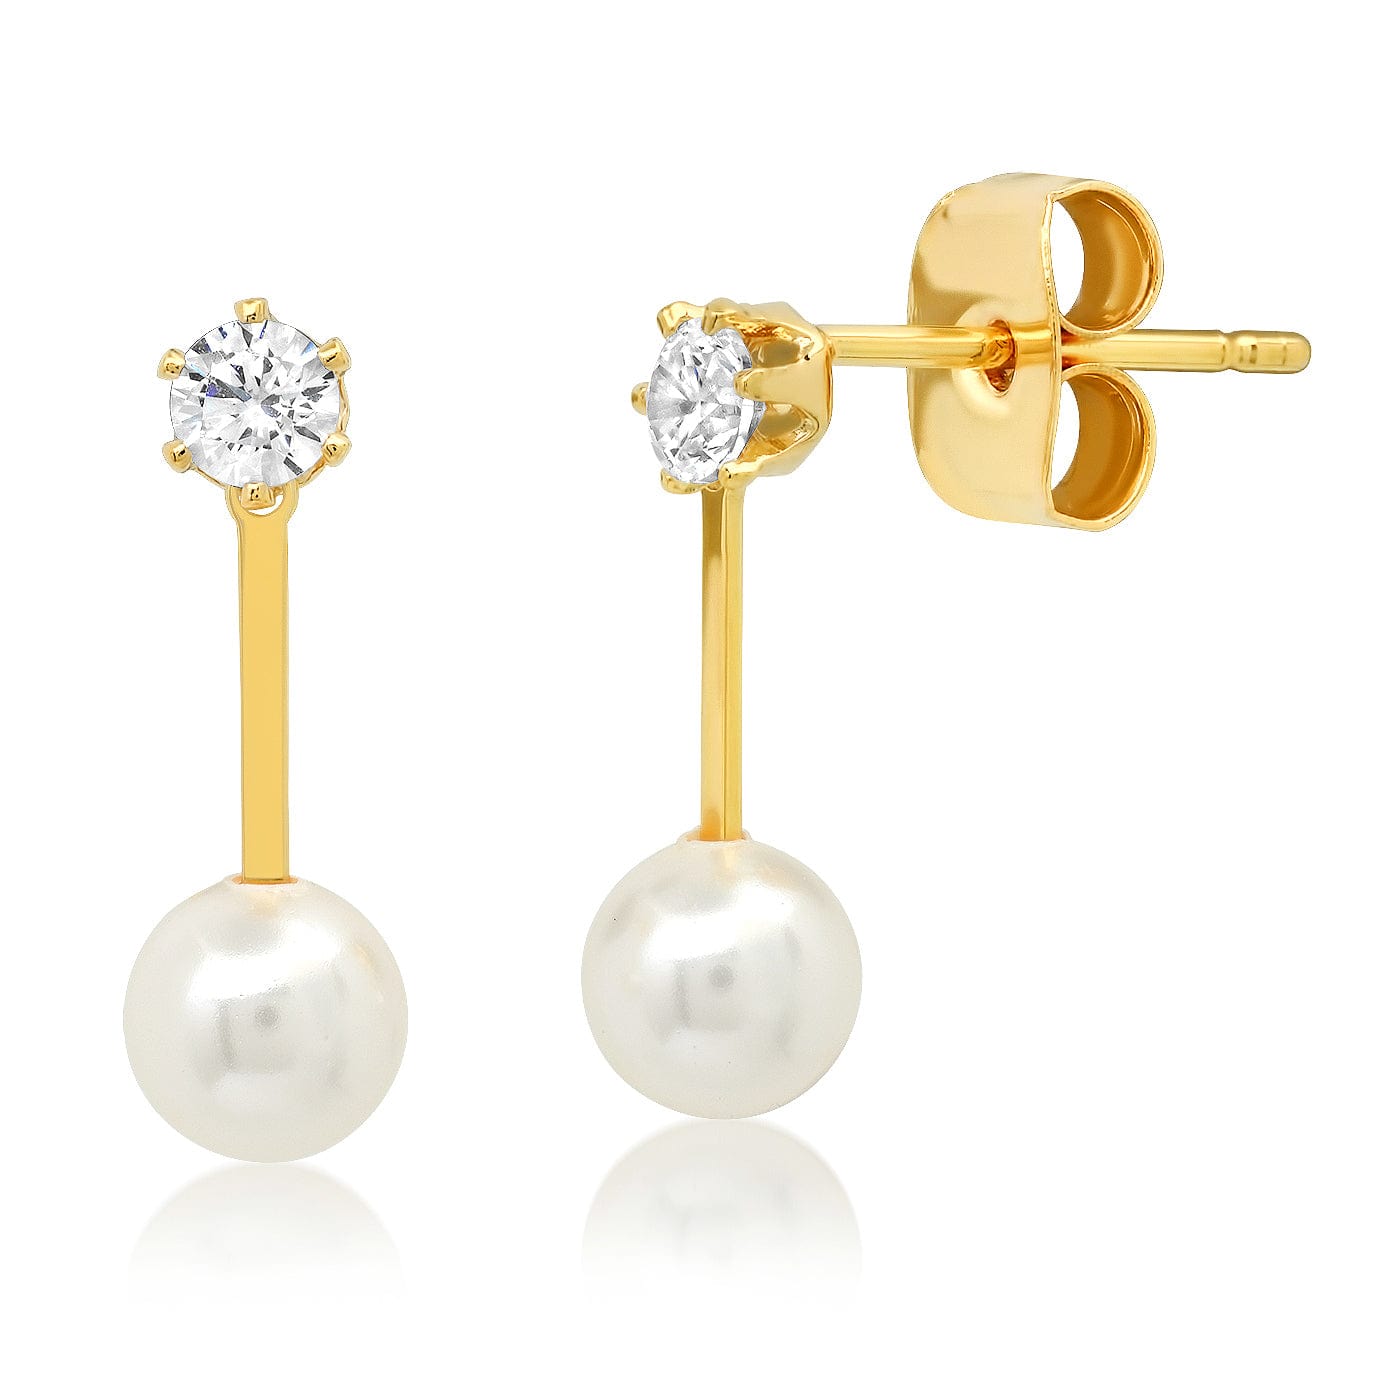 TAI JEWELRY Earrings Gold Stick Stud With Cz Solitaire And Pearl Accents